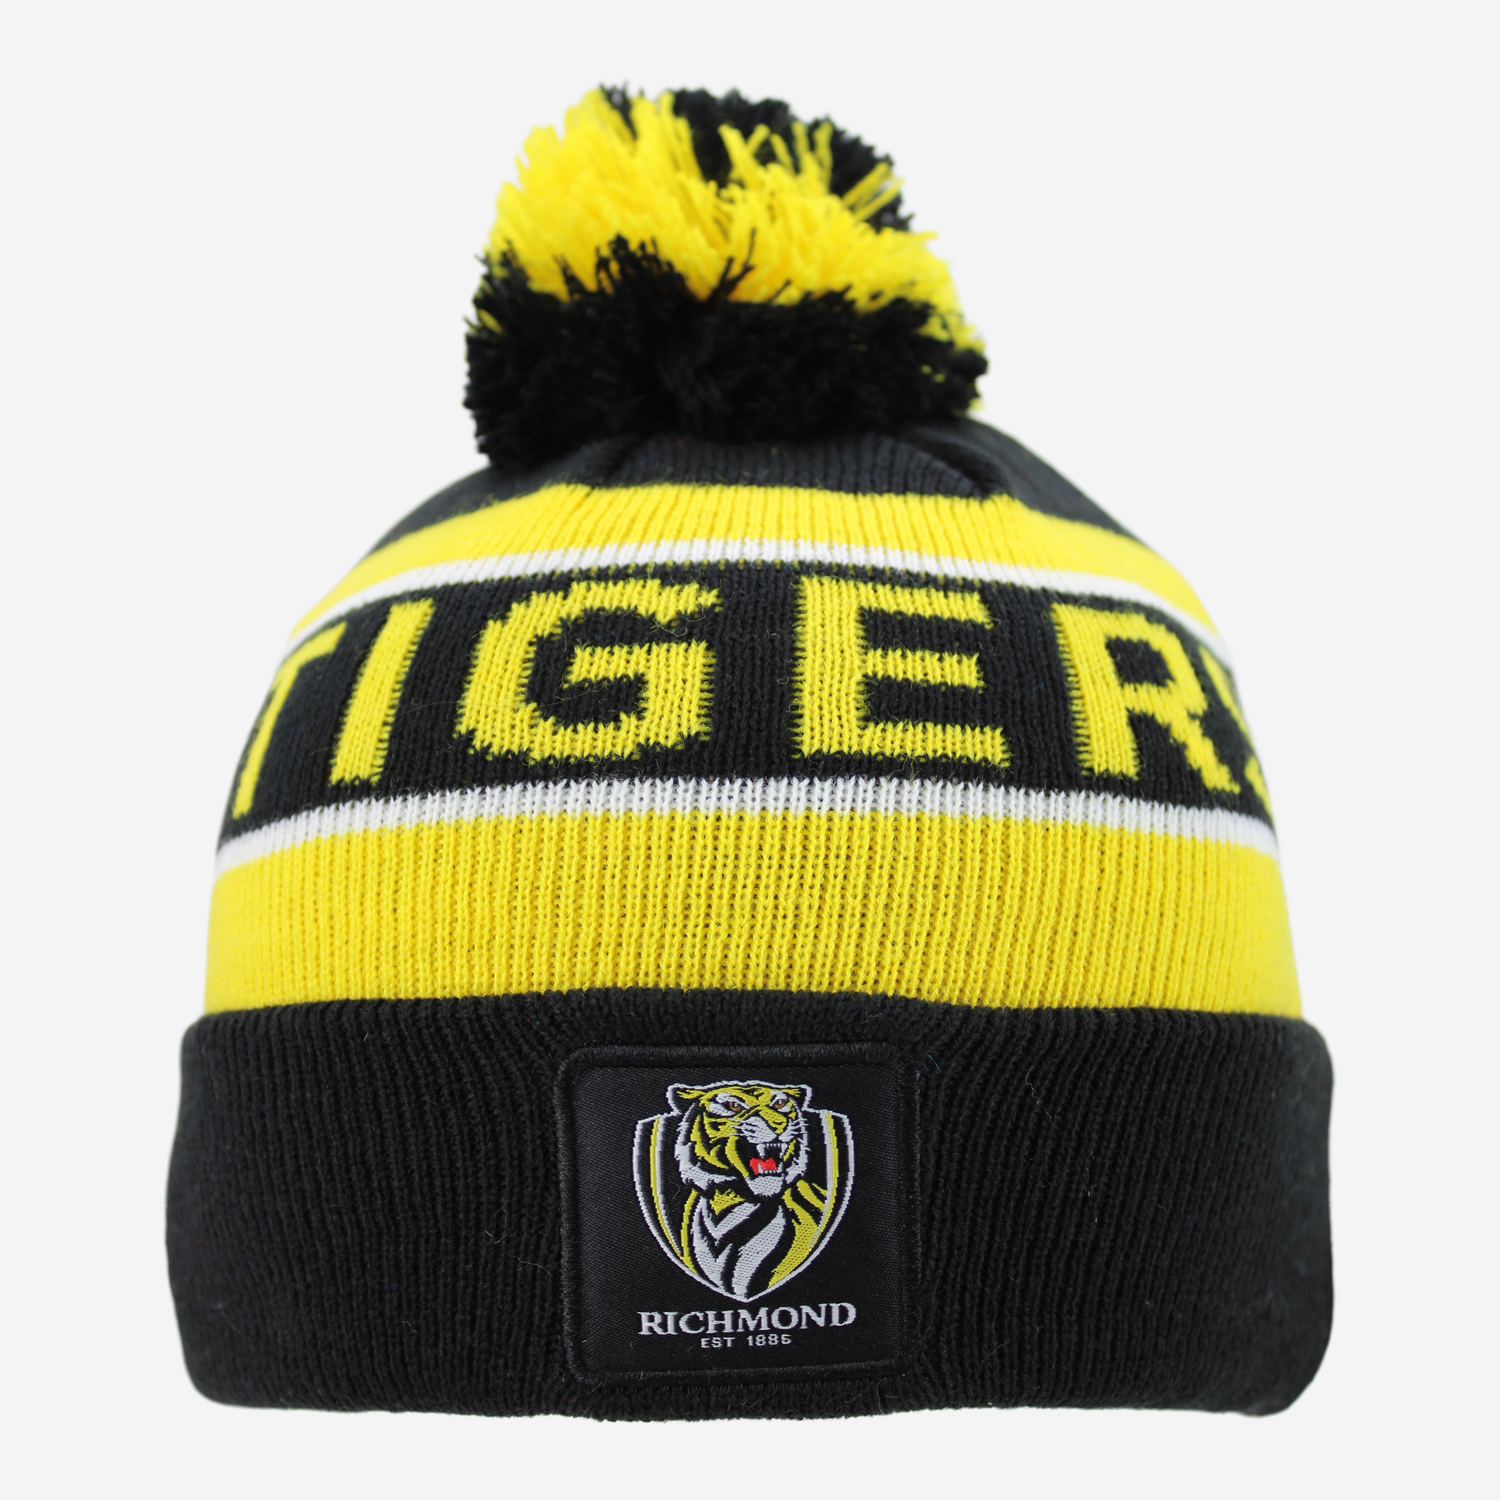 AFL youth beanies tigers